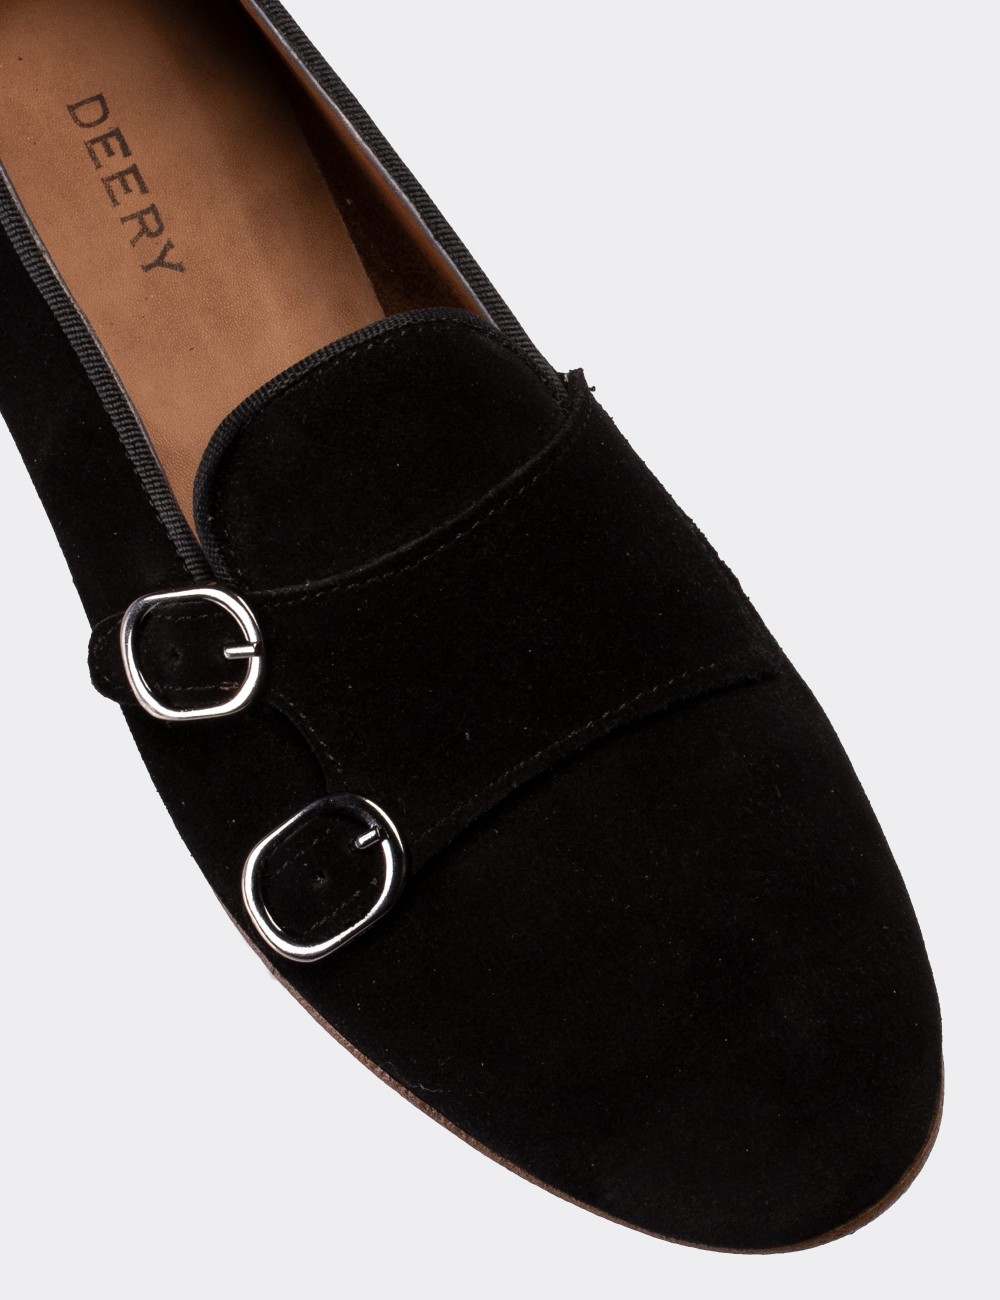 Black Suede Leather Double Monk-Strap Loafers - 01611ZSYHM04